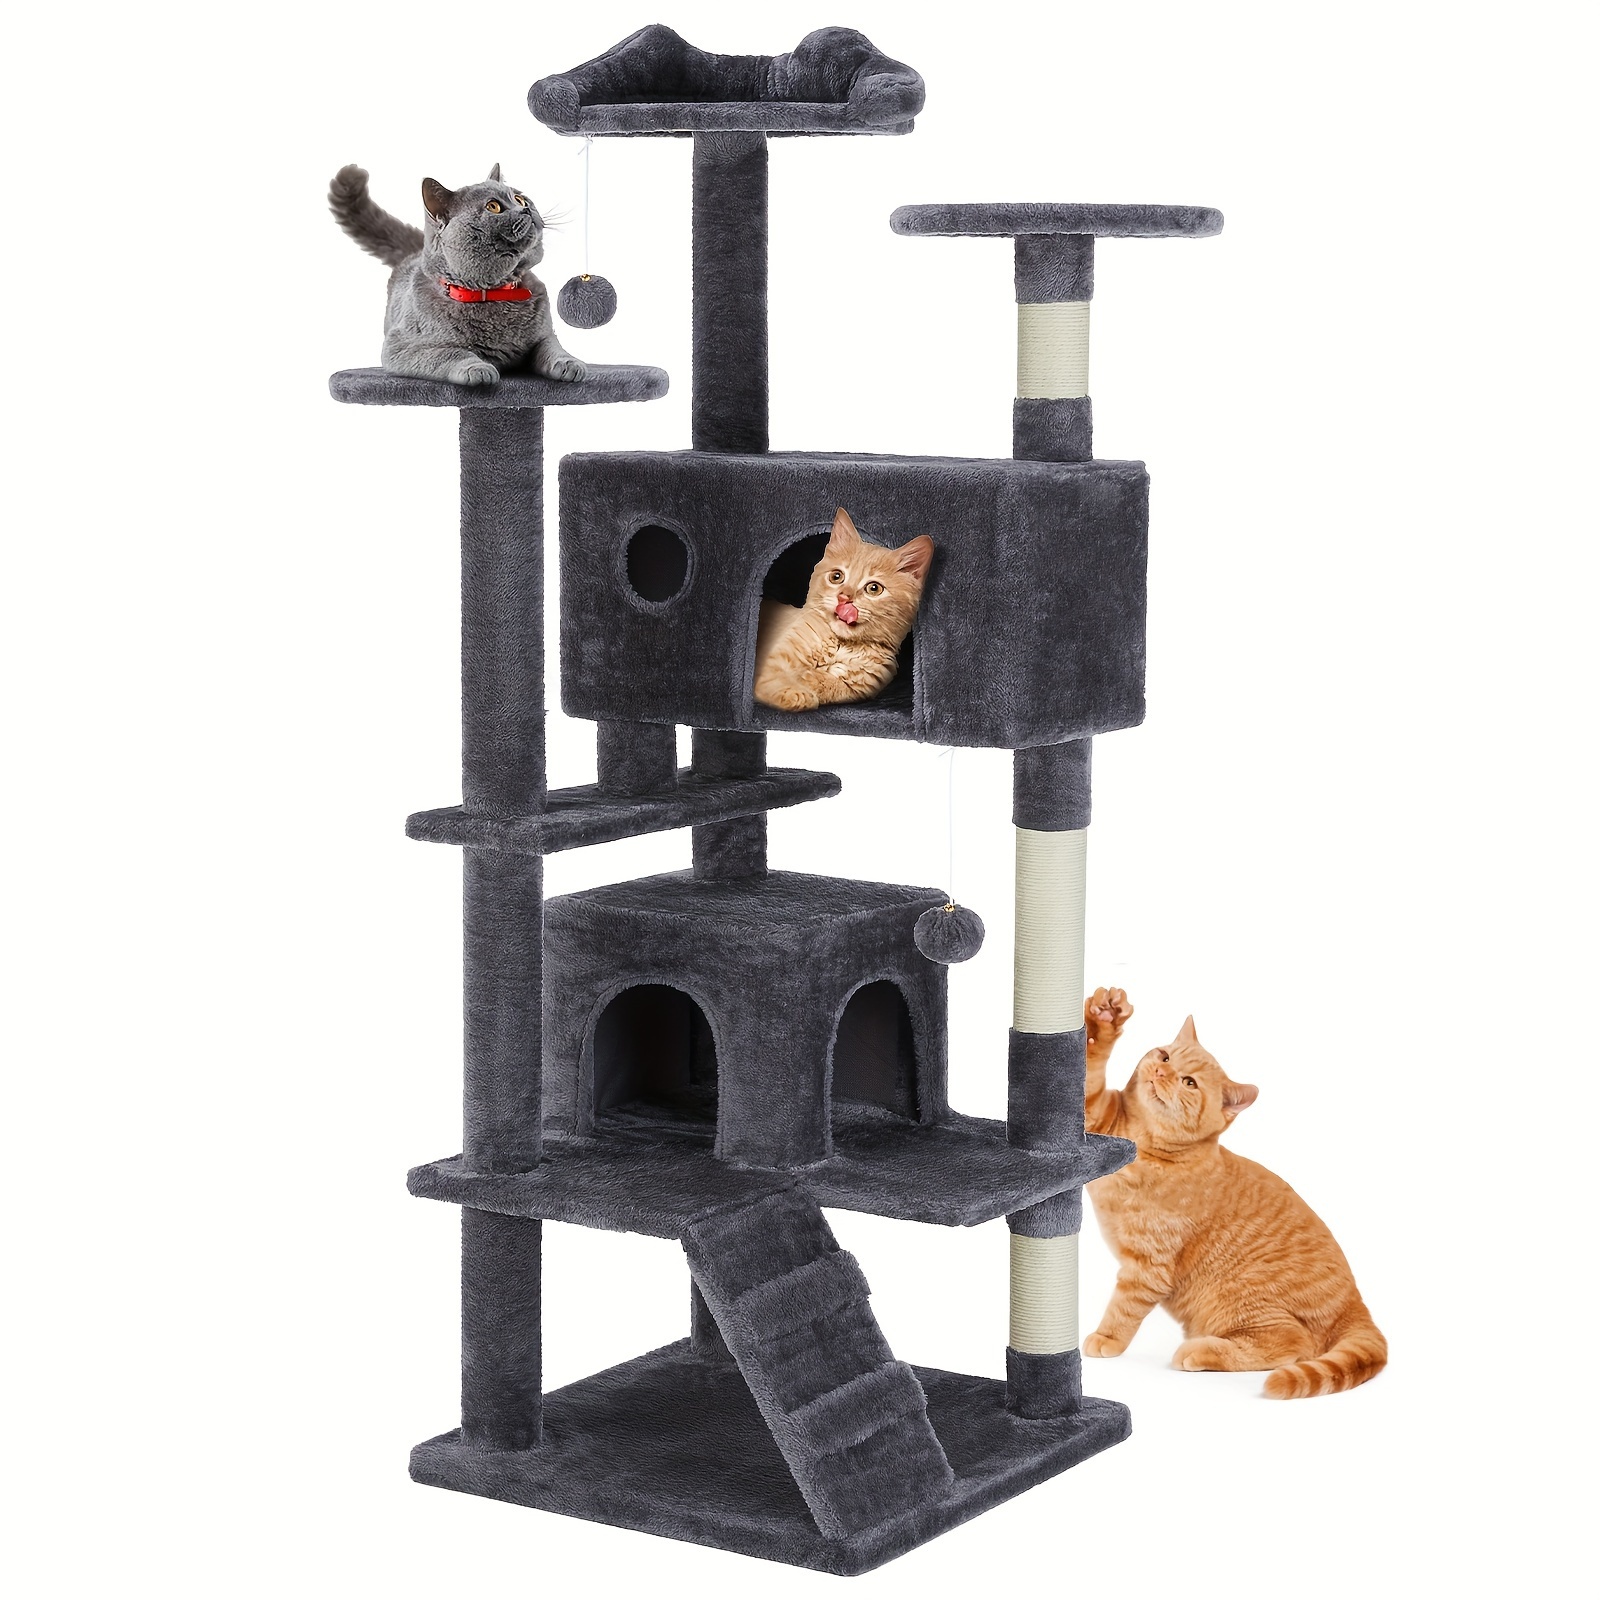 

Cat Tree Tower For Indoor Cats, 54in Tall Multi-level Pet Furniture, Kitty Play House With Sisal Scratching Post, Large Condo, Climbing Ladder, Plush Toy For Kitten